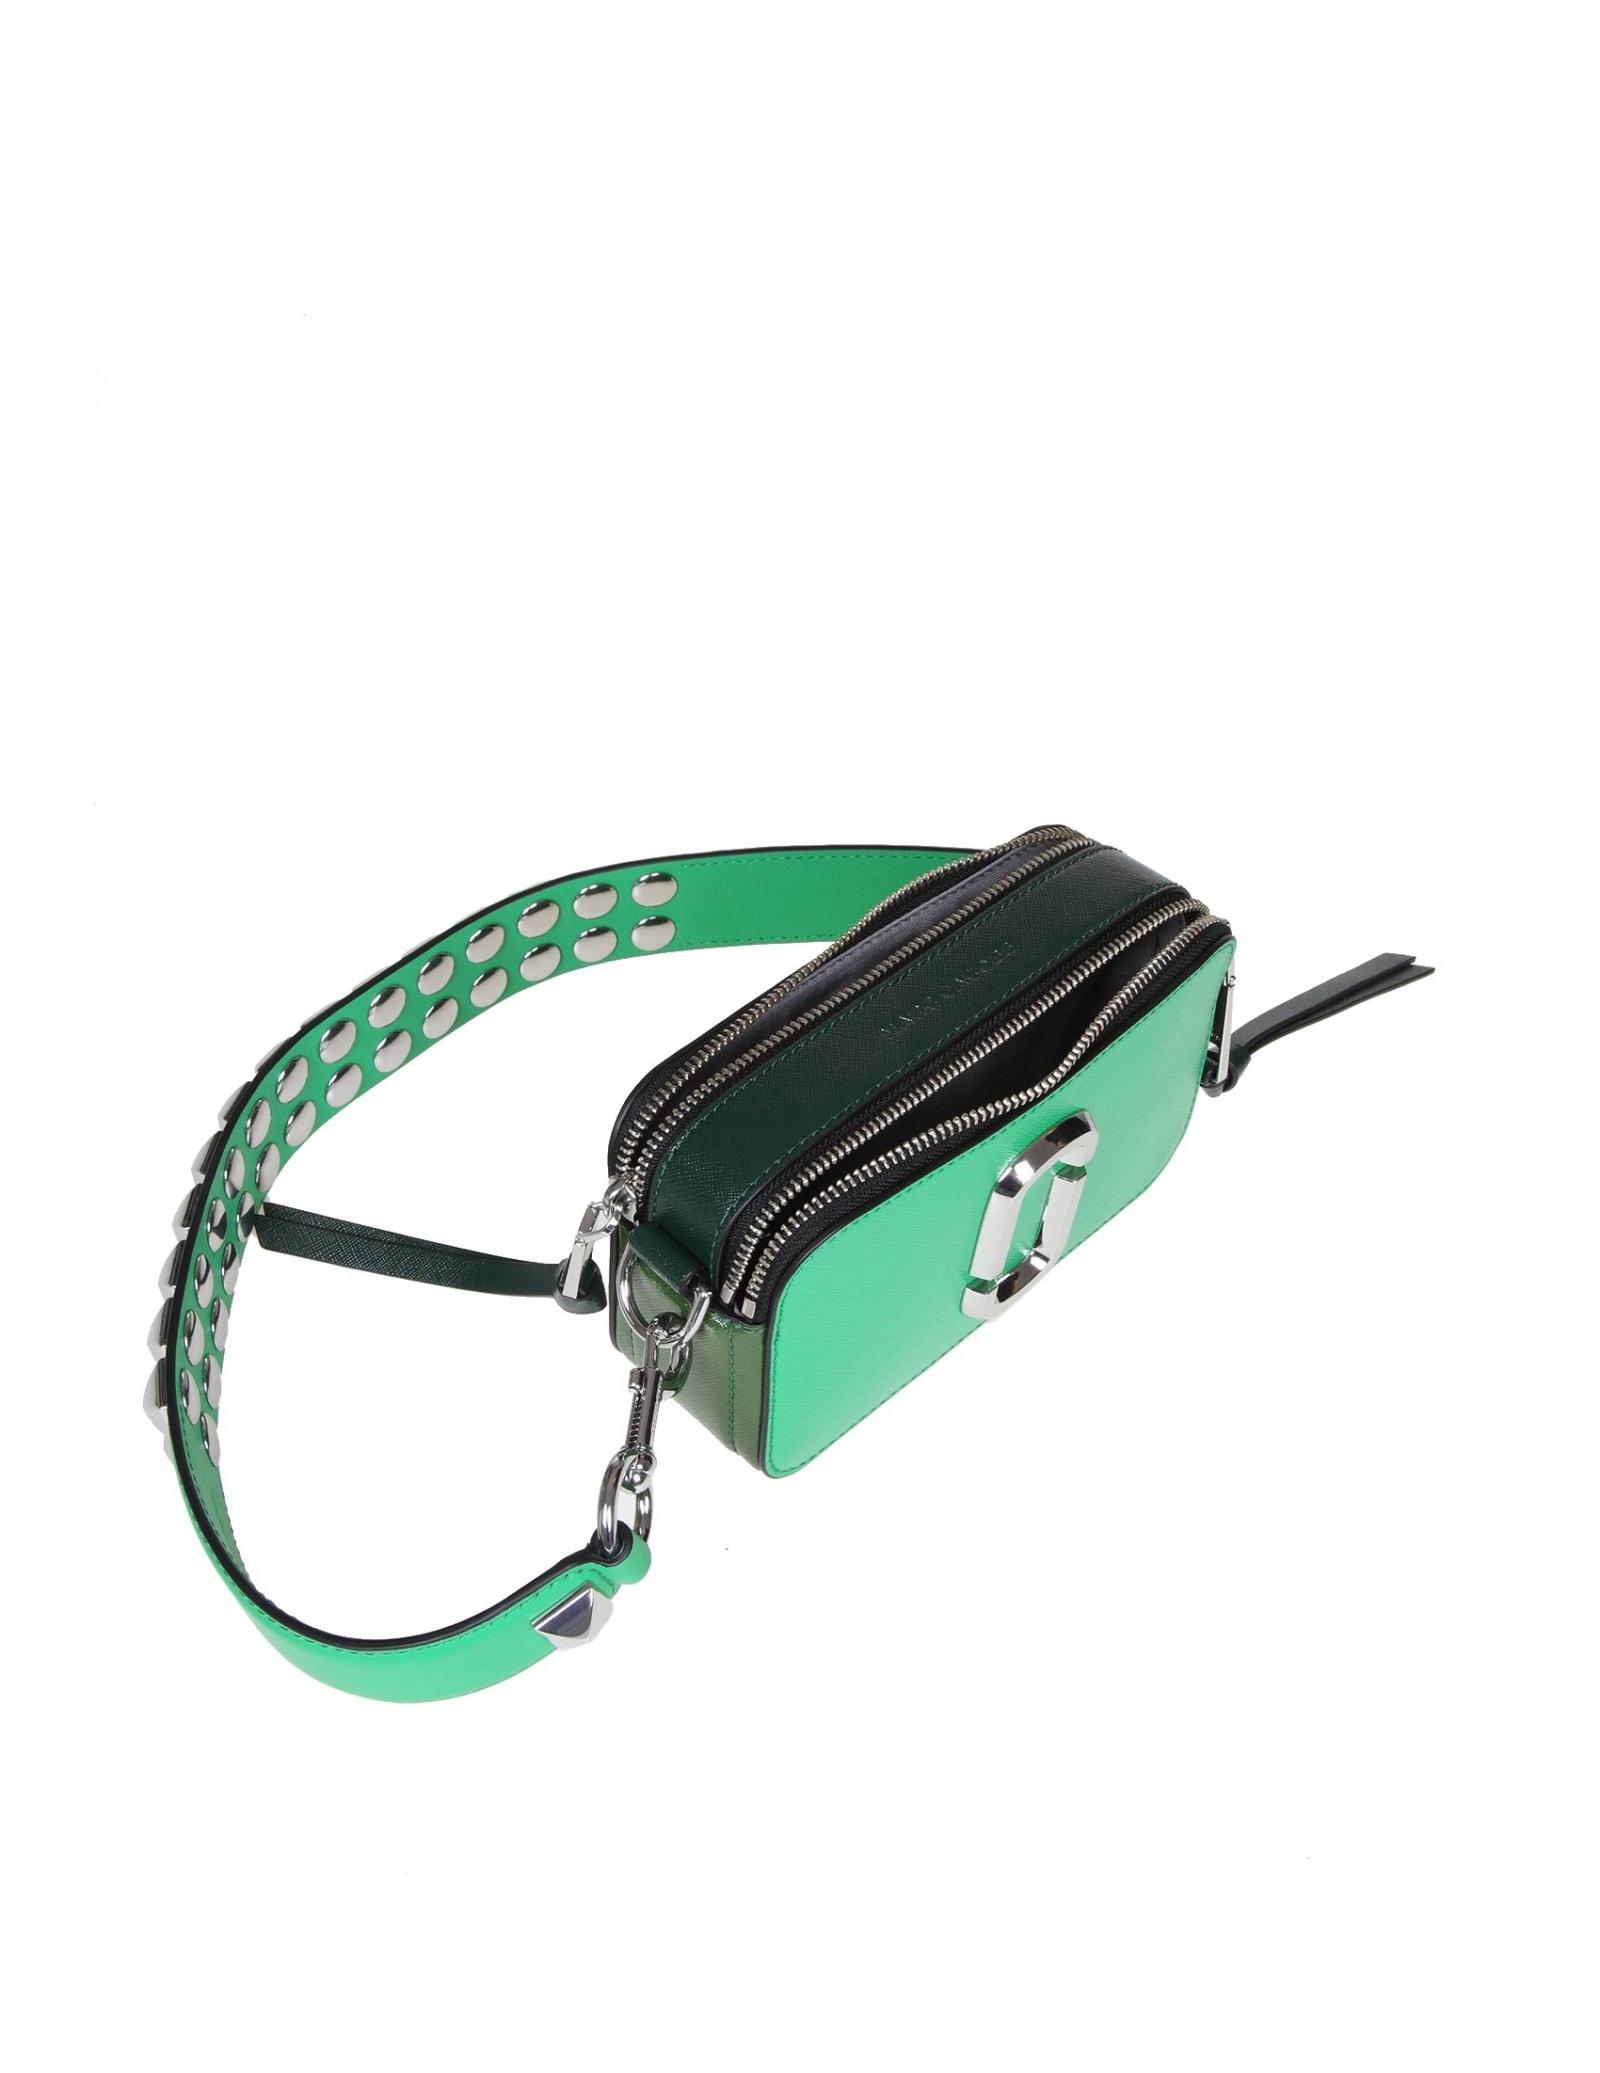 Marc Jacobs Snapshot Bag In Leather With Applied Studs In Green